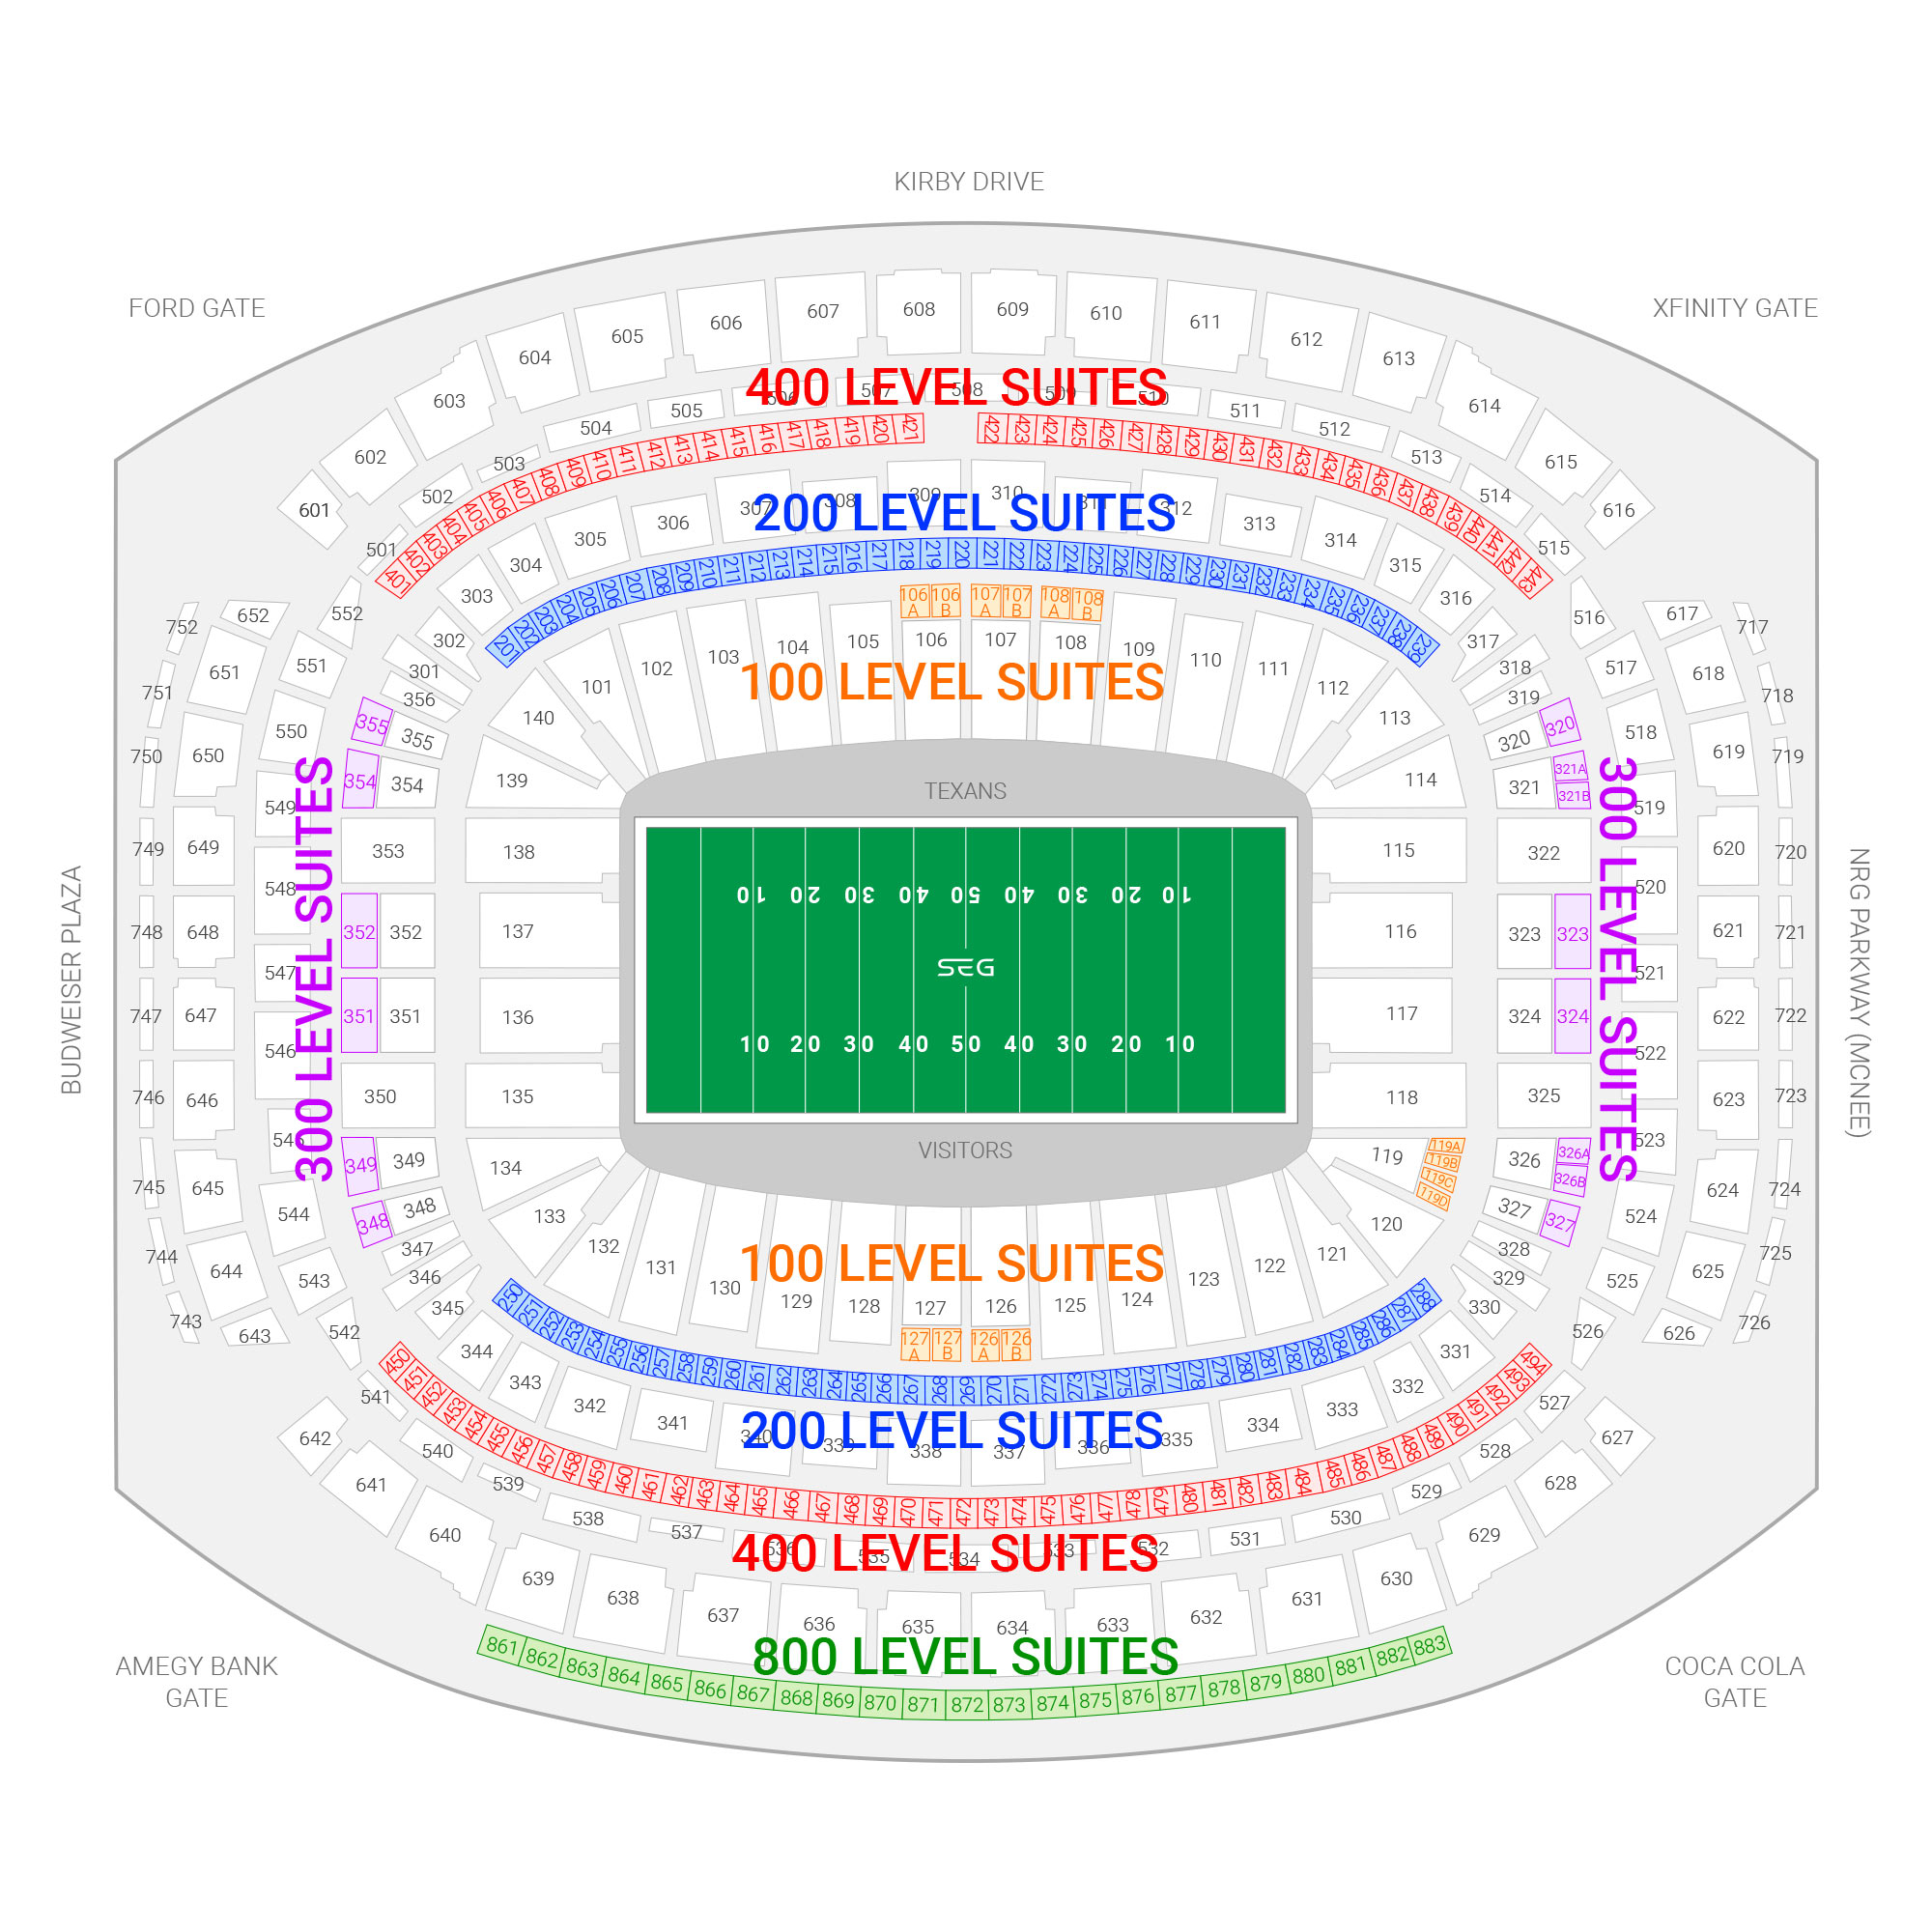 NRG Stadium / Houston Texans Suite Map and Seating Chart